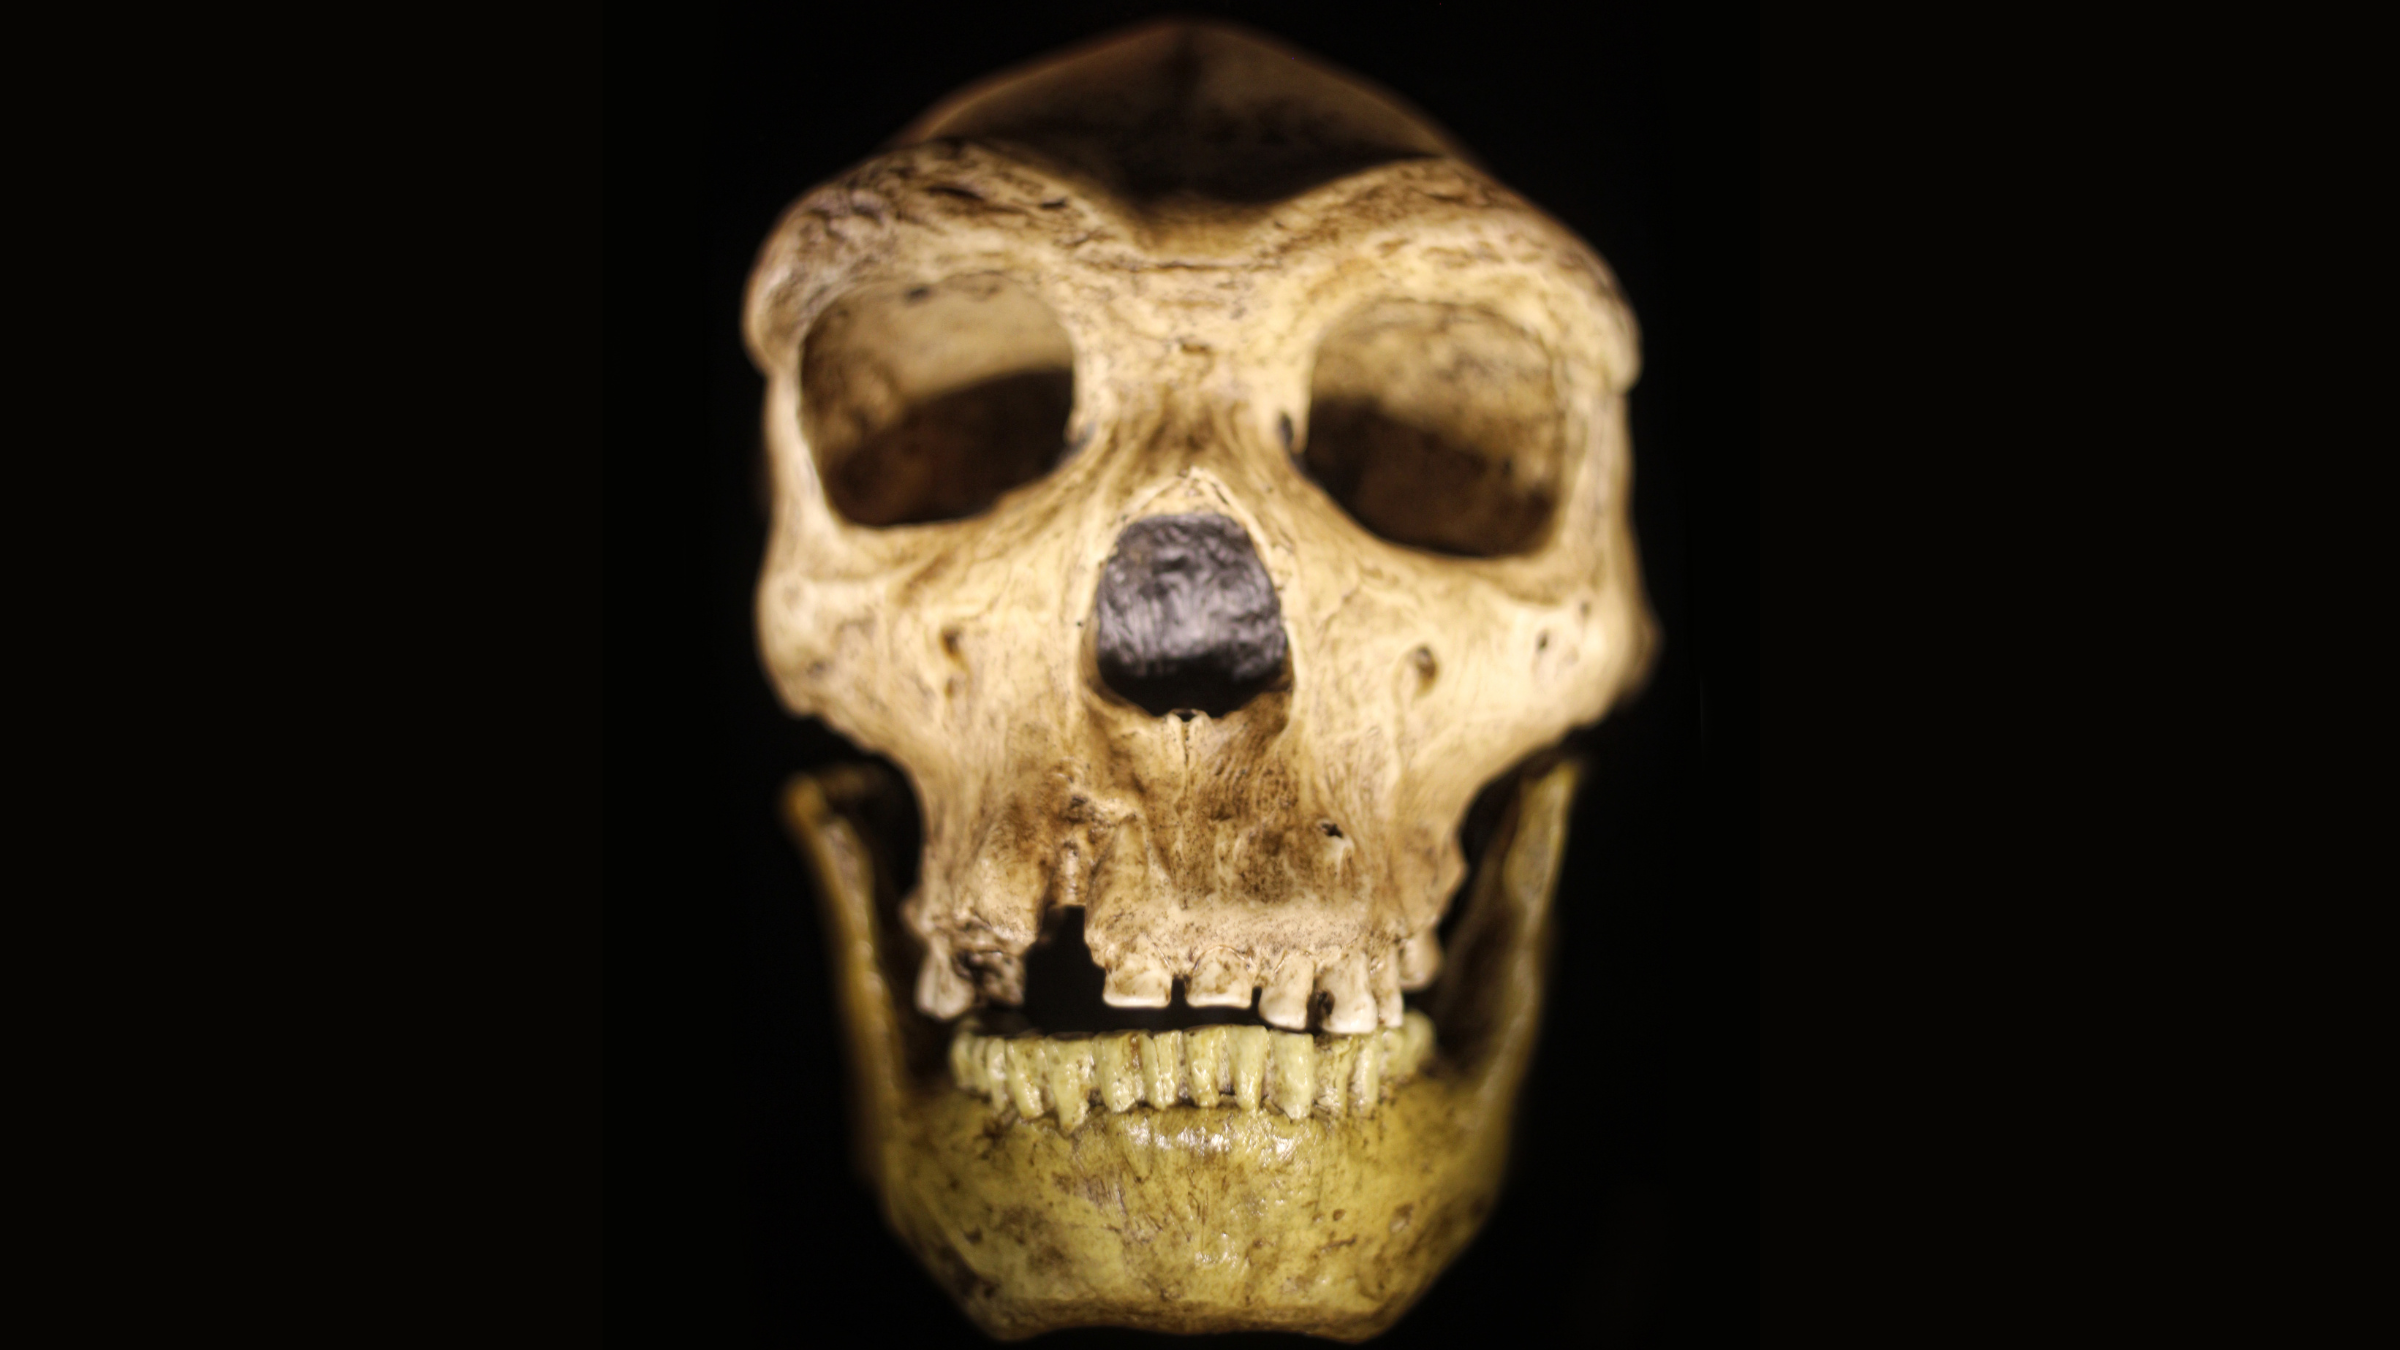 Could Neanderthals talk?